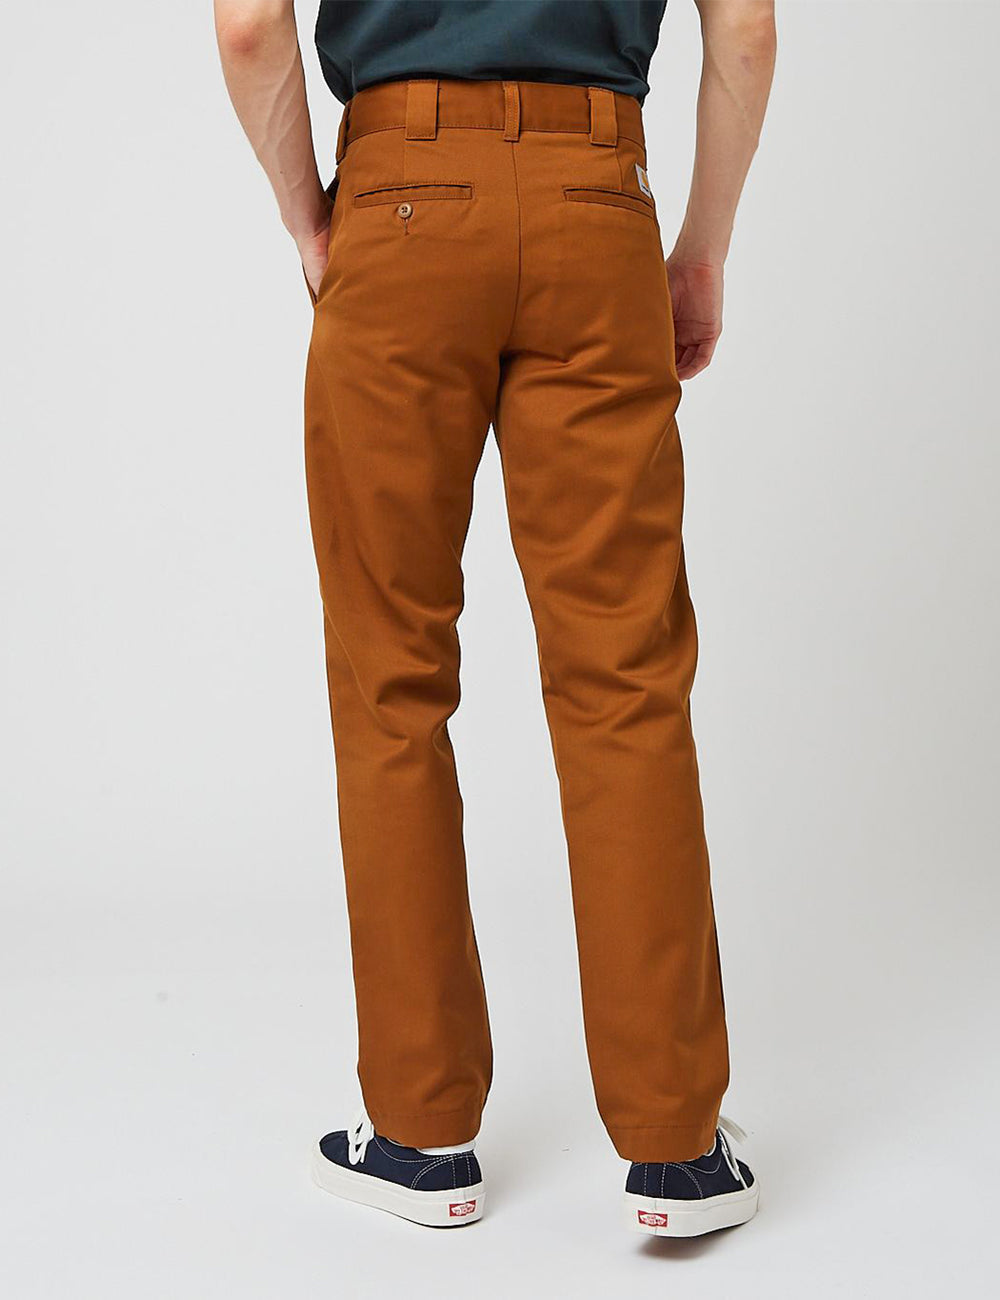 Carhartt-WIP Master Pant (Relaxed) - Tawny Rinsed I URBAN EXCESS.